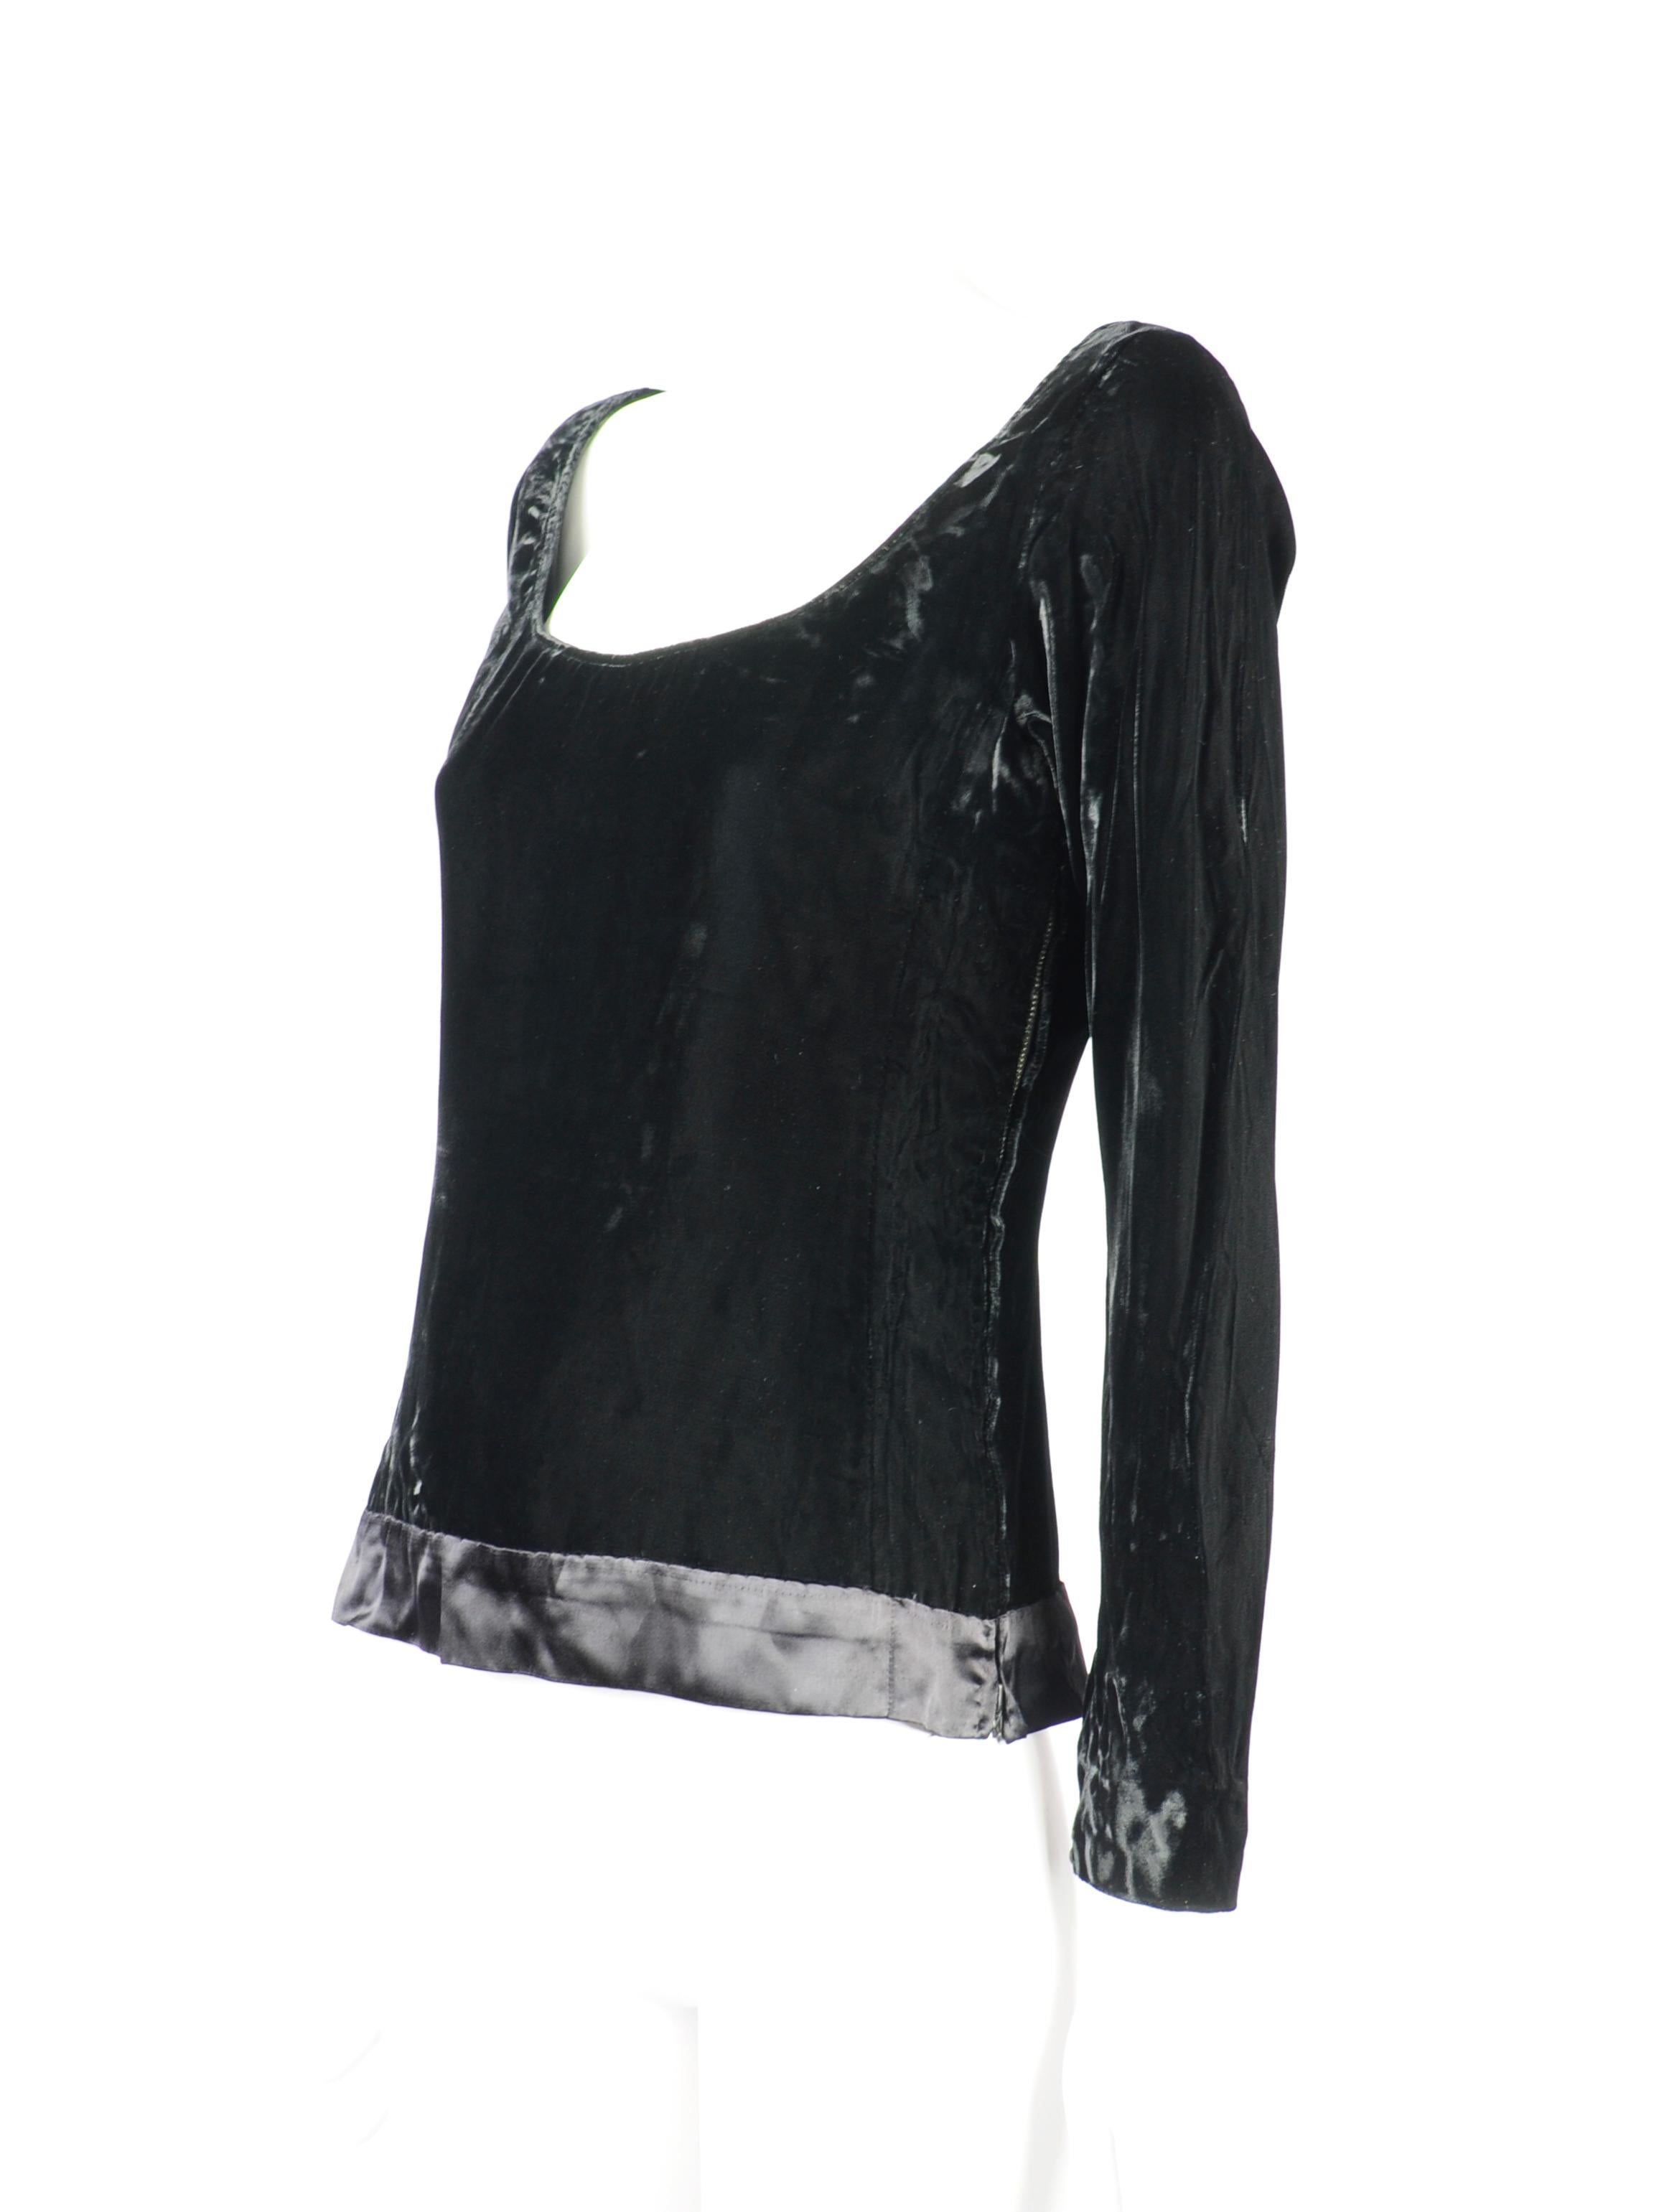 Yves Saint Laurent Rive Gauche velvet and satin evening wear top with long sleeves from the 1970s. The top features a slit on the back, four plastic buttons with passementerie rope closure and a side zipper to allow a snug fit without the need for